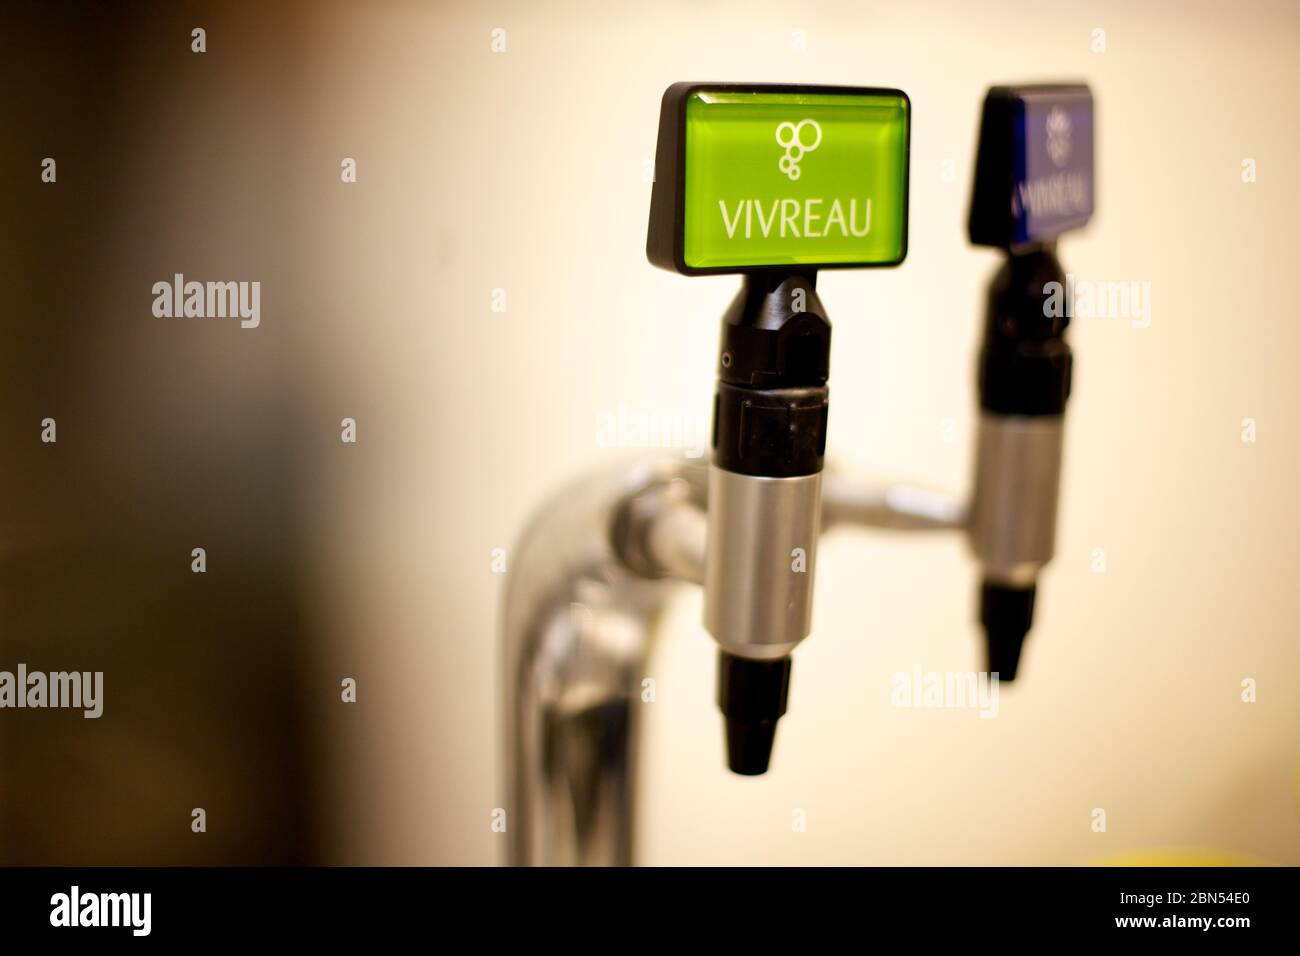 Vivreau water tap dispensing hot and cold water, Stock Photo